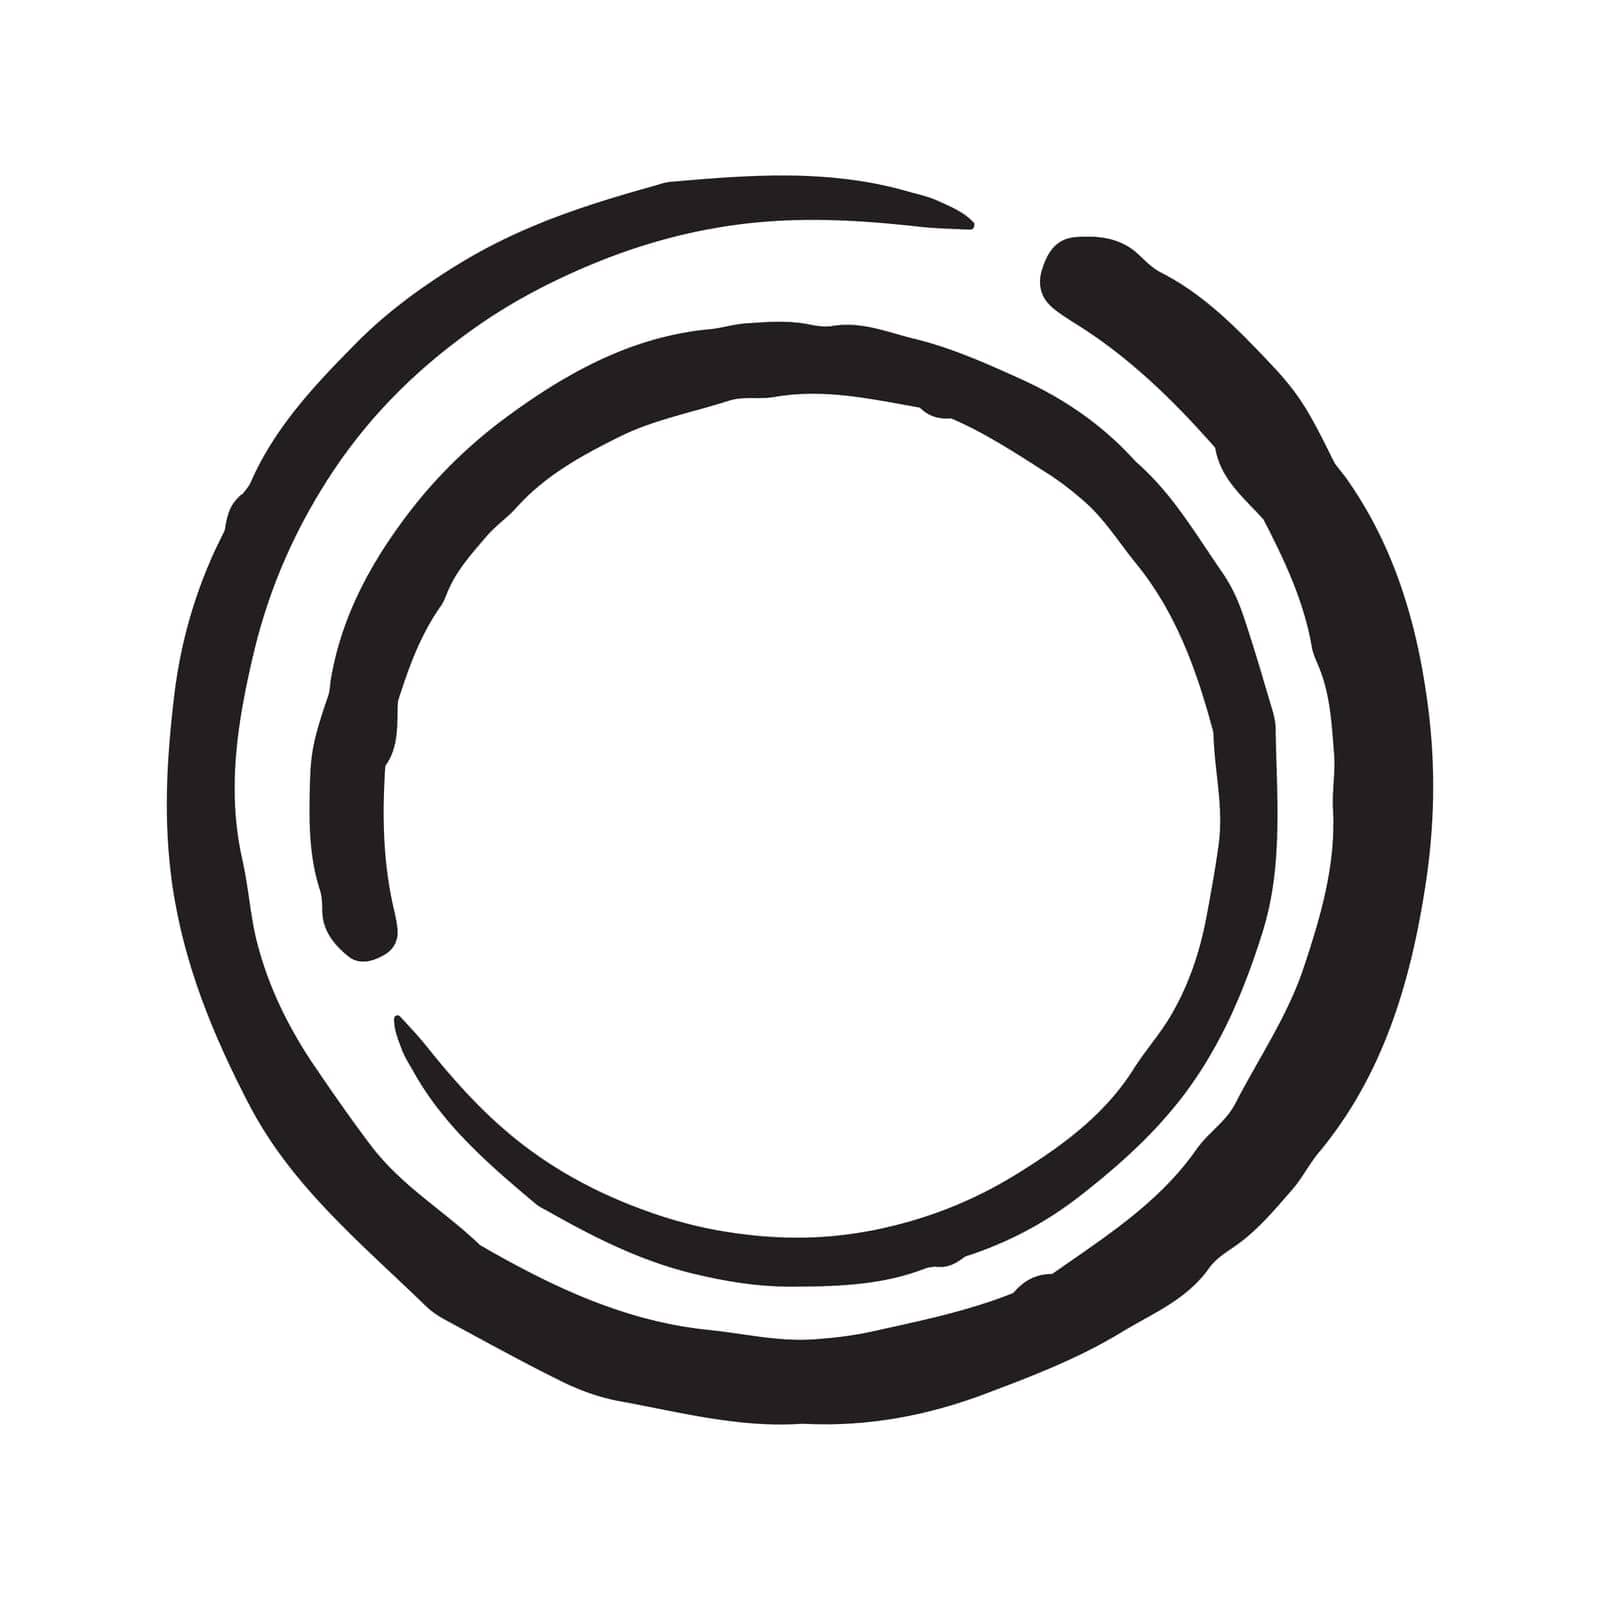 circle load icon element logo by Mrsongrphc